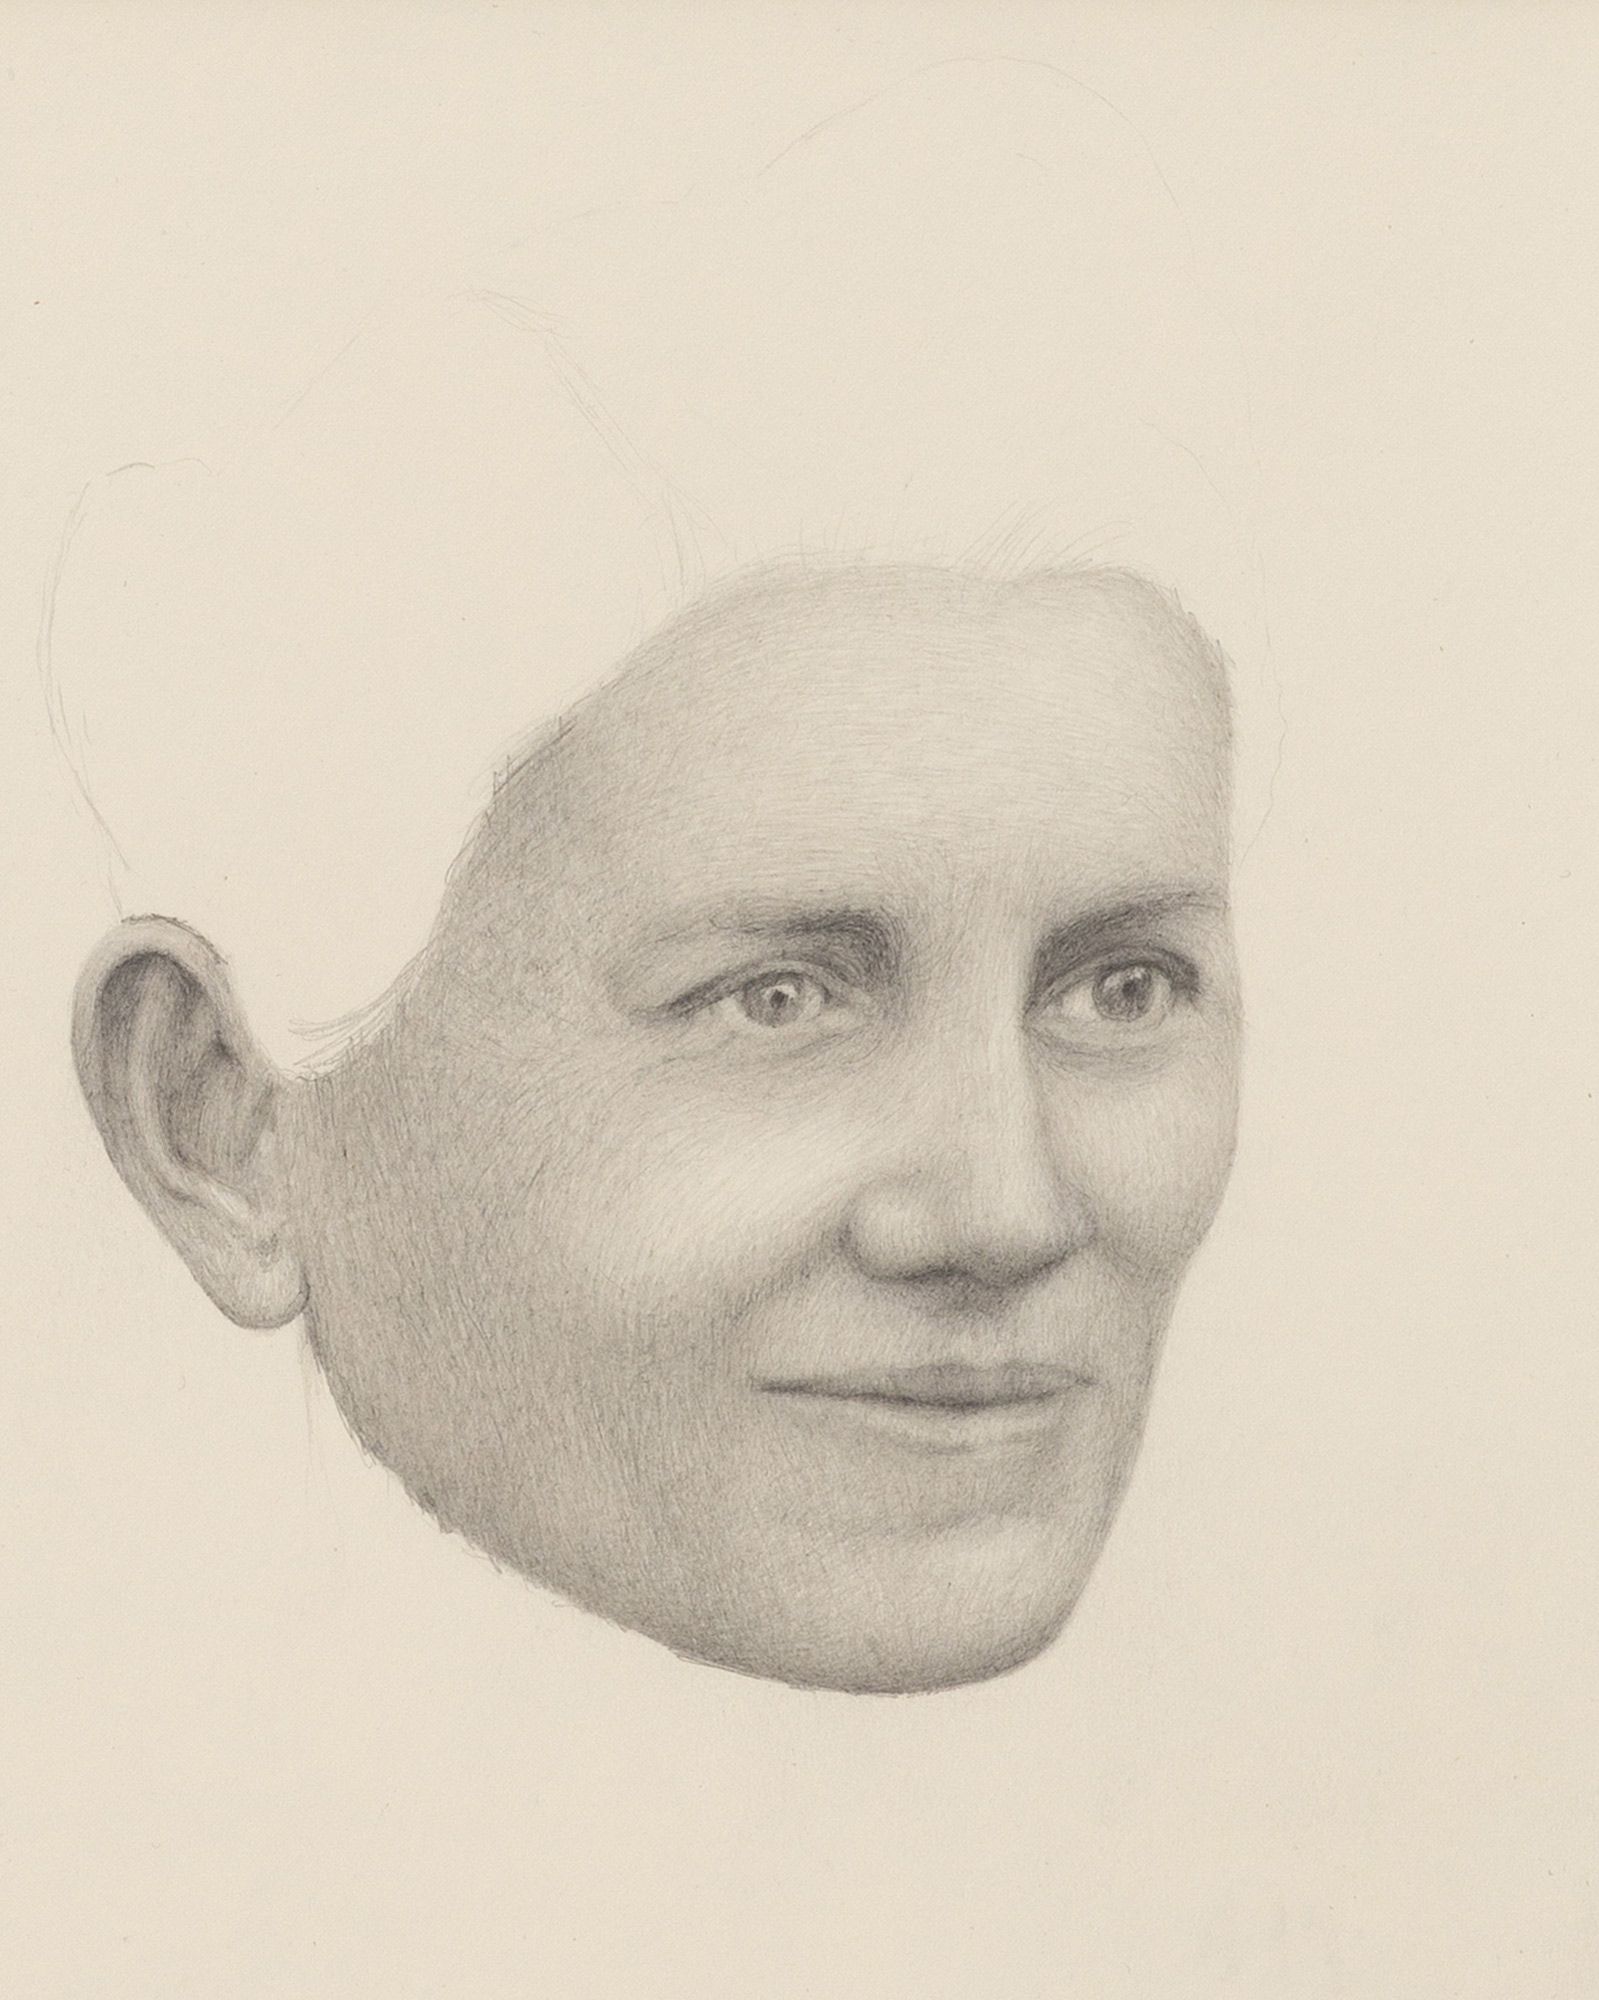 Detailed pencil drawing of a person's face, capturing expressive eyes, a subtle smile, and ear contours.